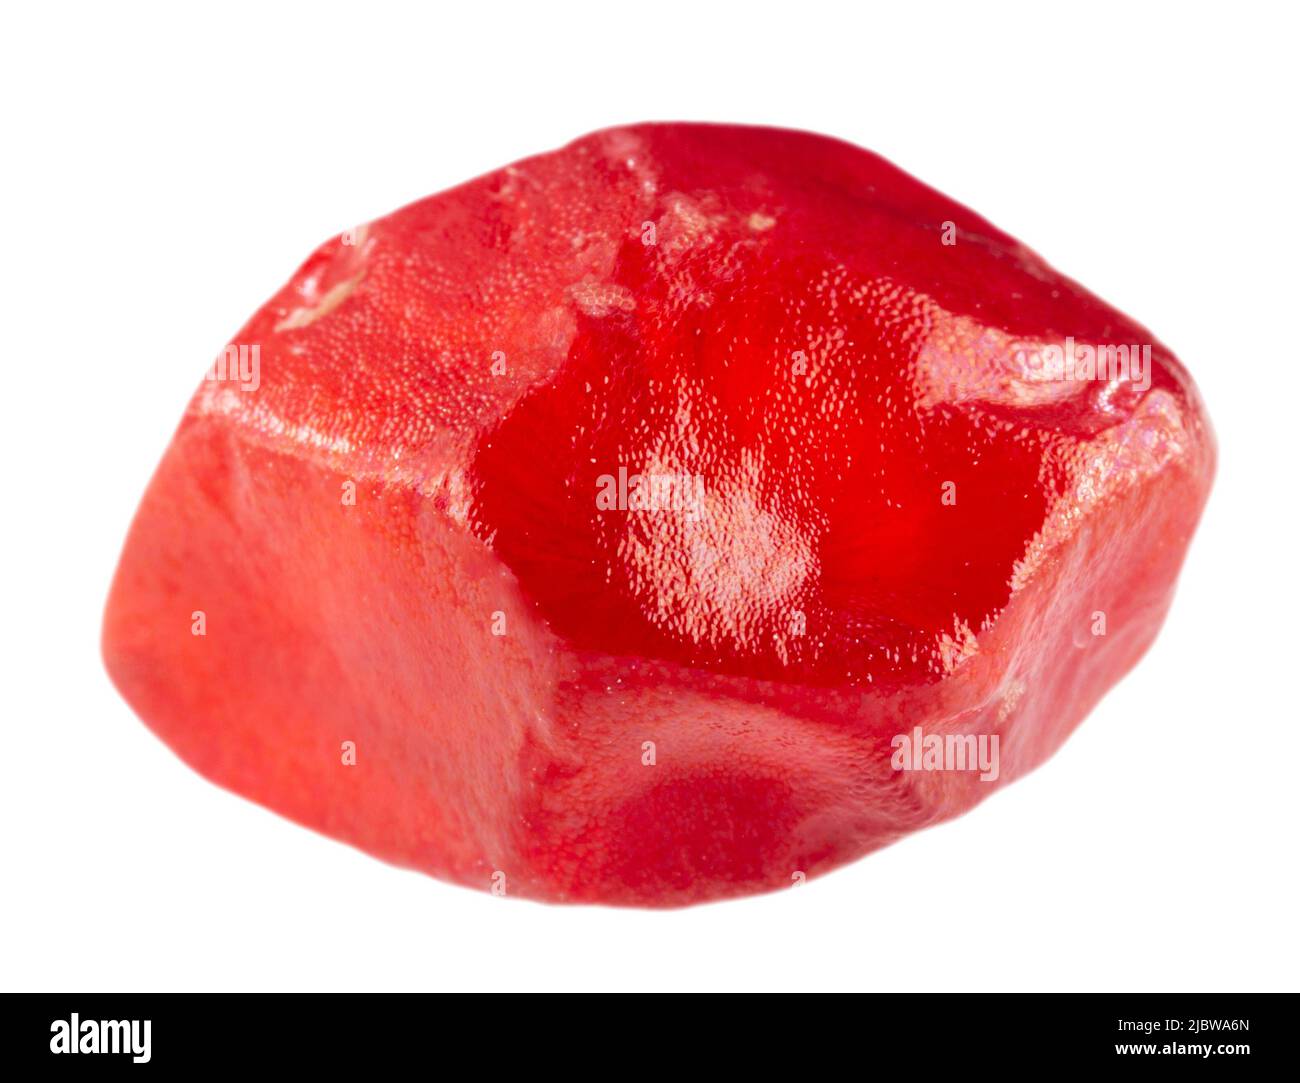 pomegranate seed isolated on a white background with clipping path. Stock Photo